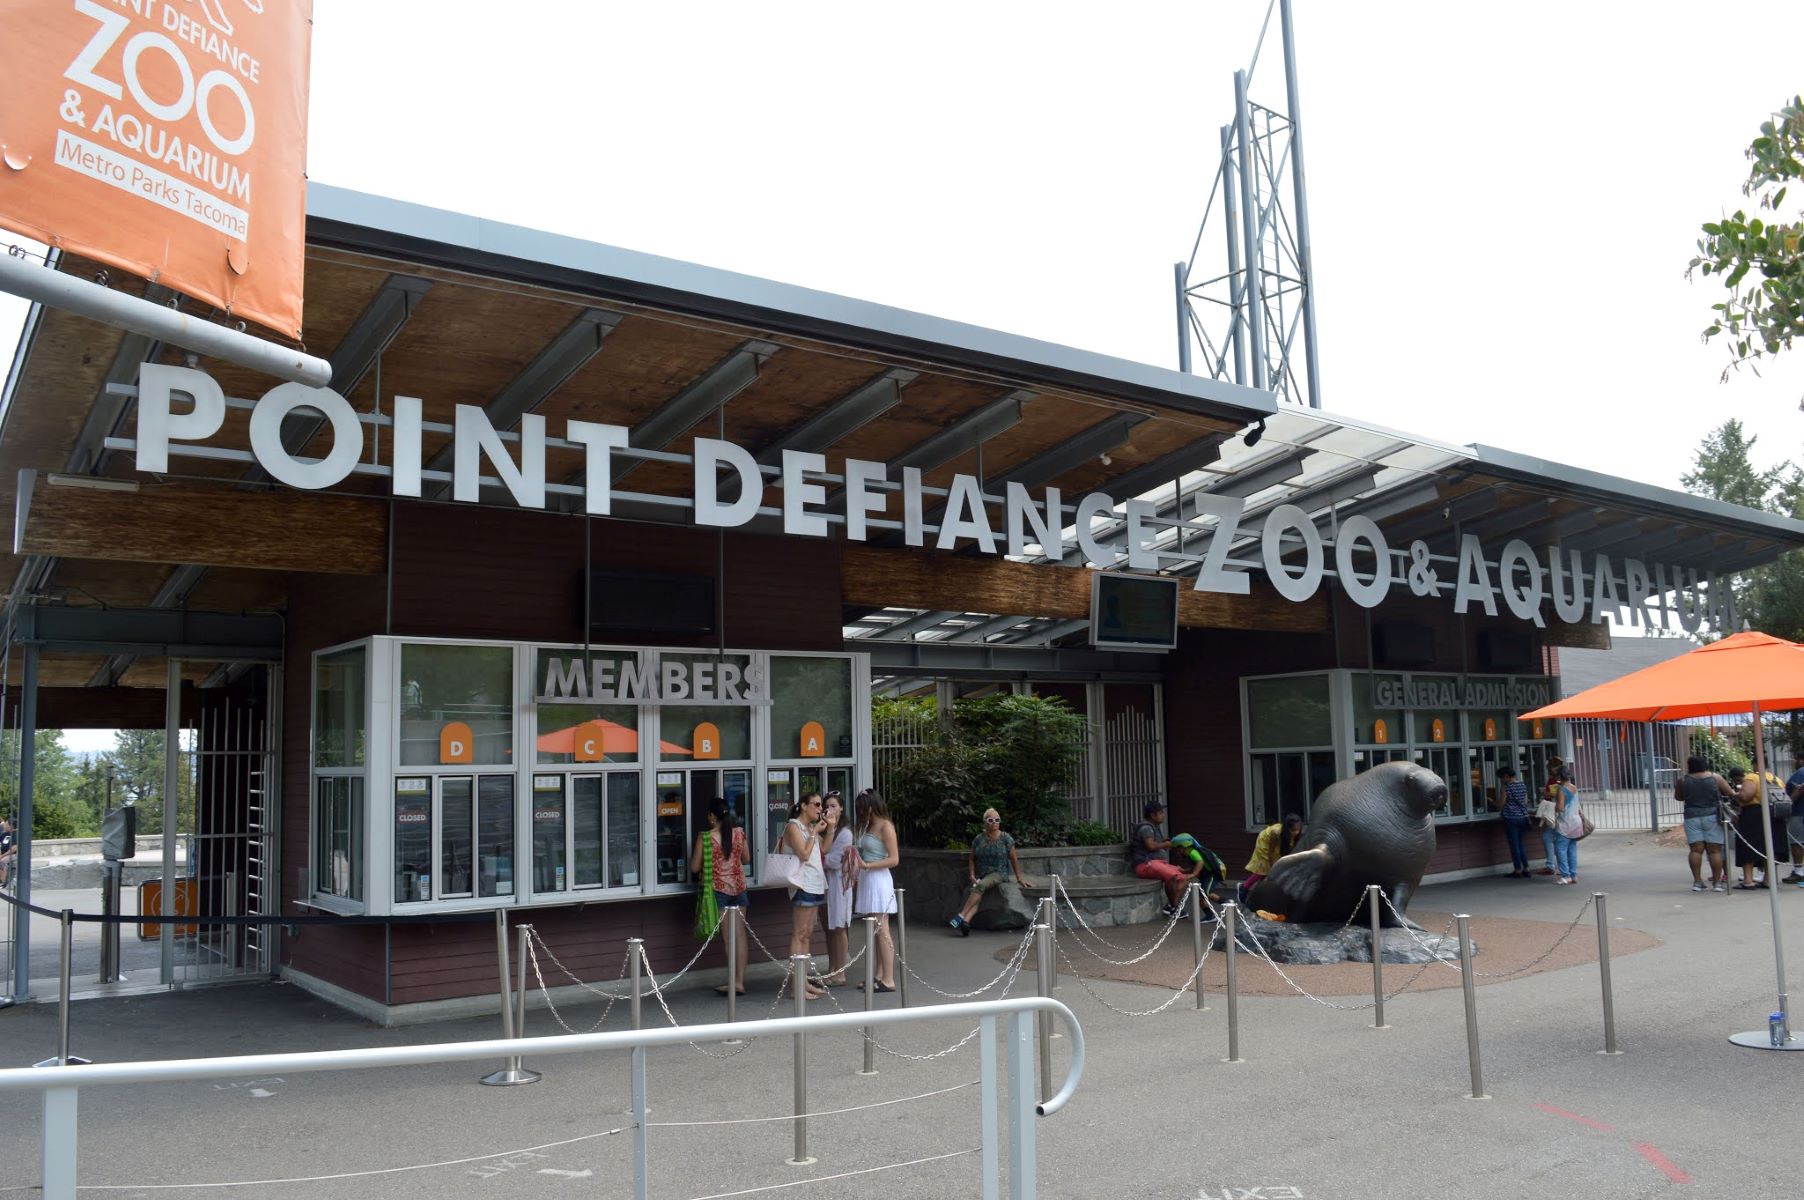 20-mind-blowing-facts-about-point-defiance-zoo-aquarium